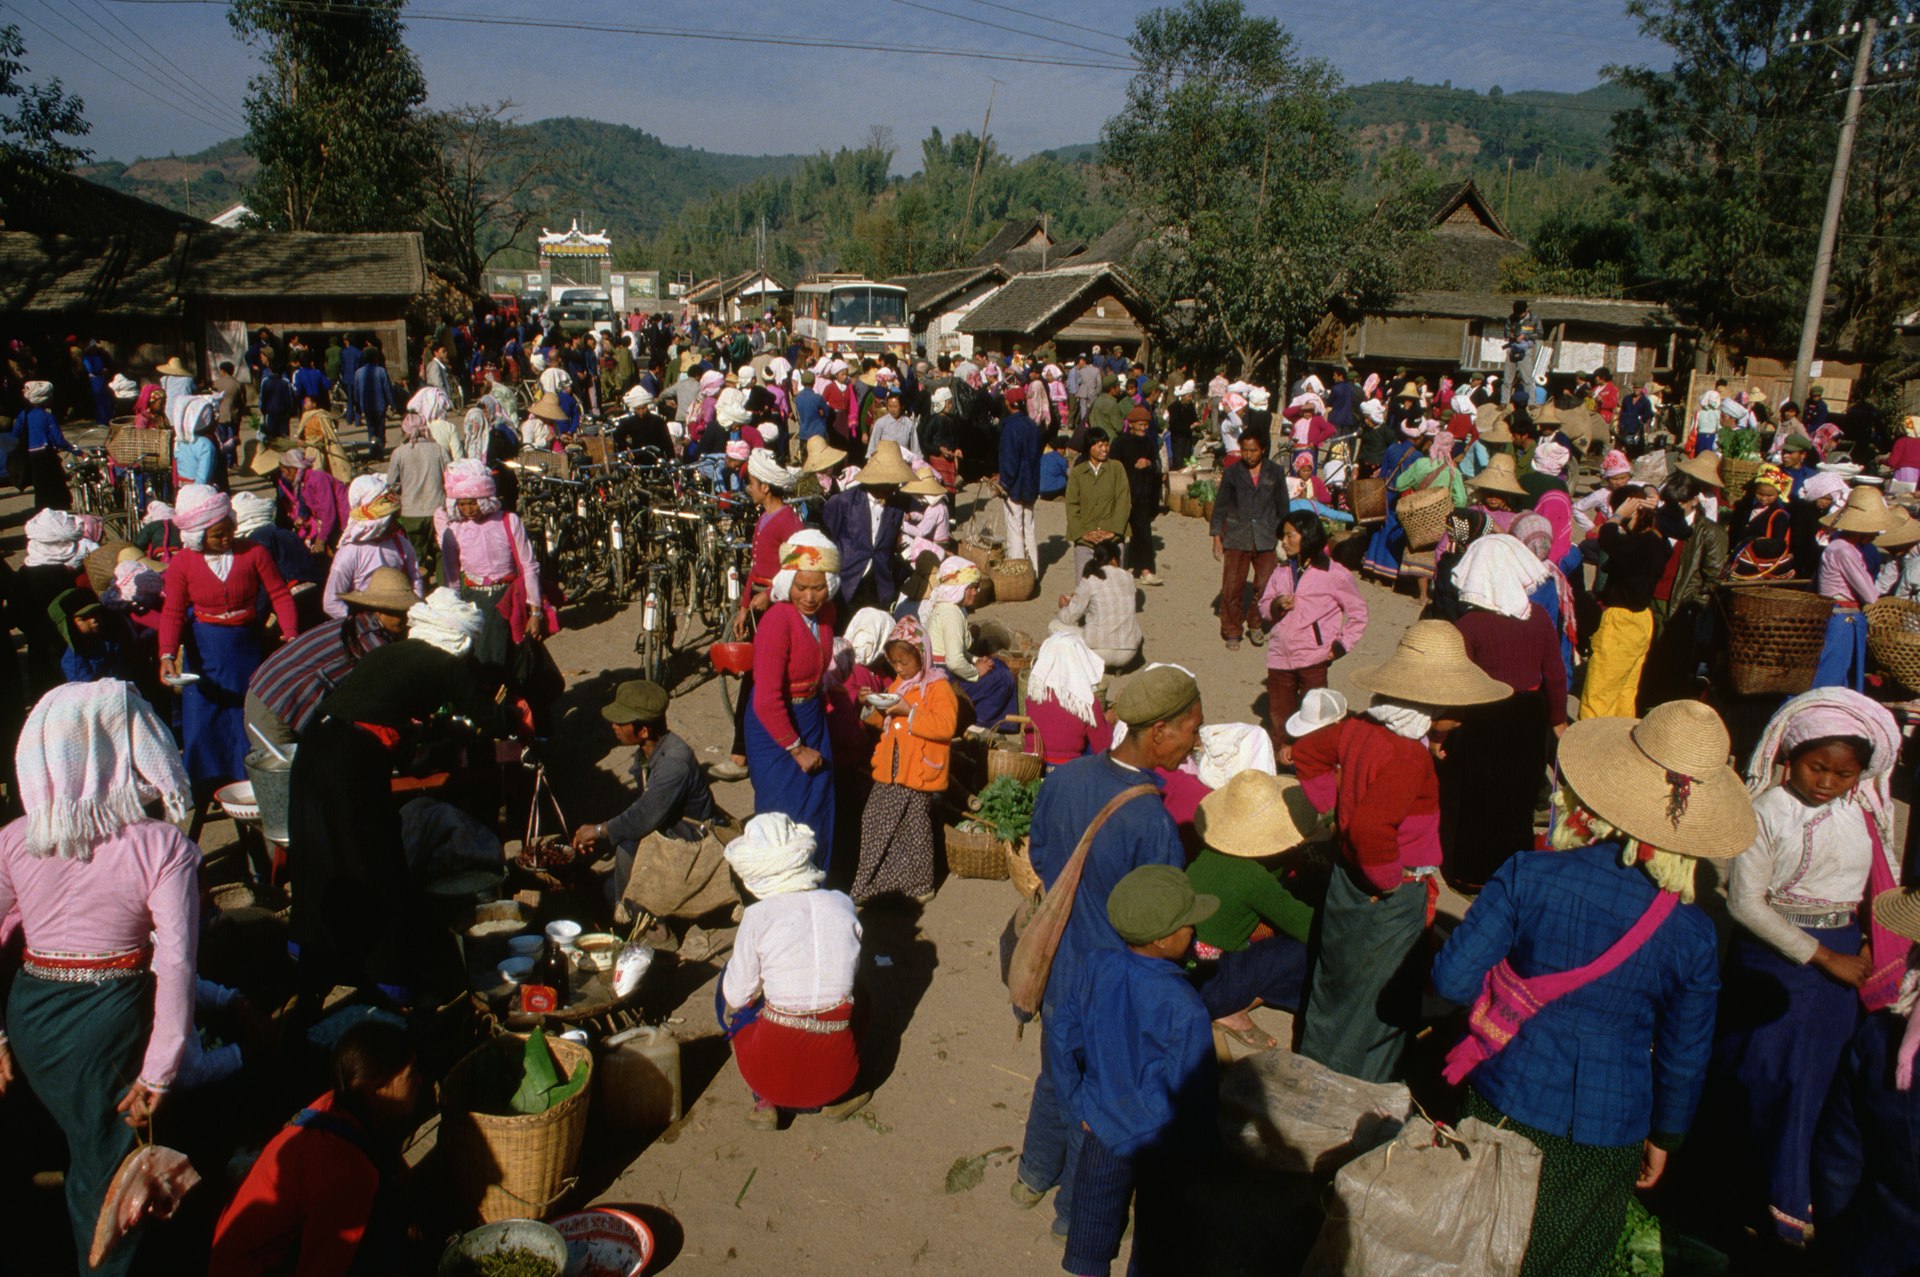 Many people in cultural dress mingle around at an outdoors market